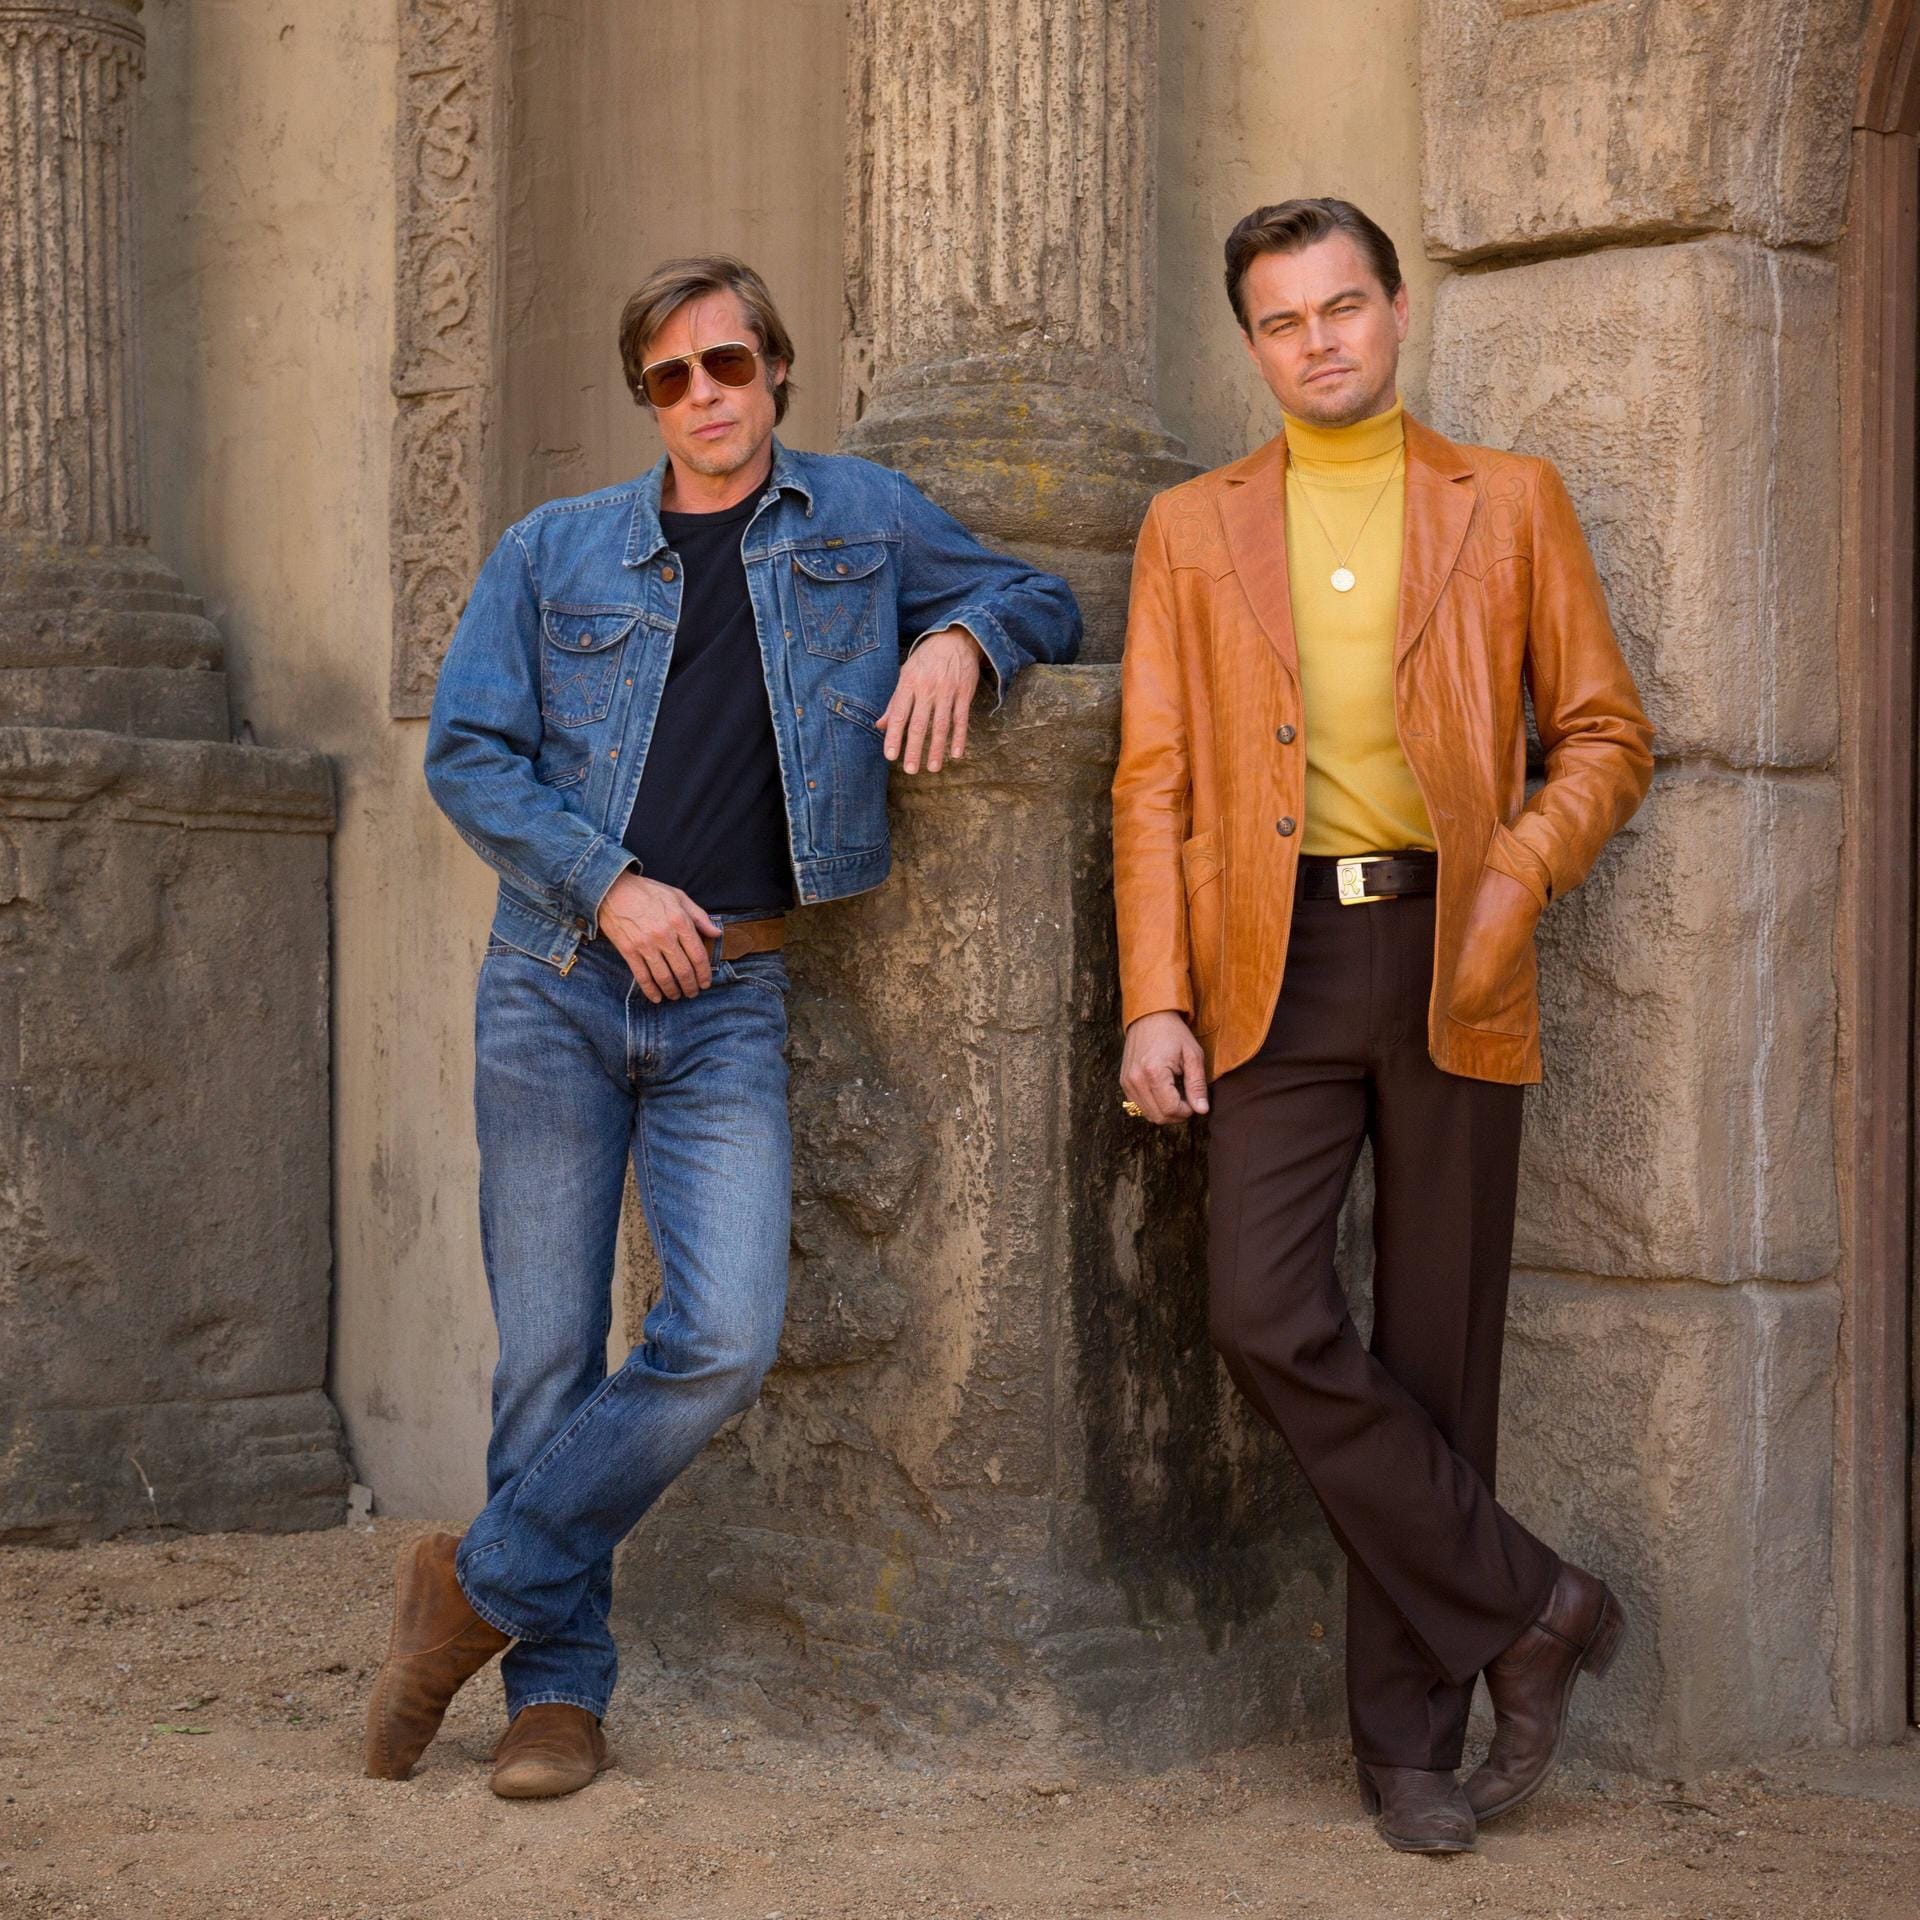 "Once Upon a Time in Hollywood", Brad Pitt und Leonardo DiCaprio, 2019